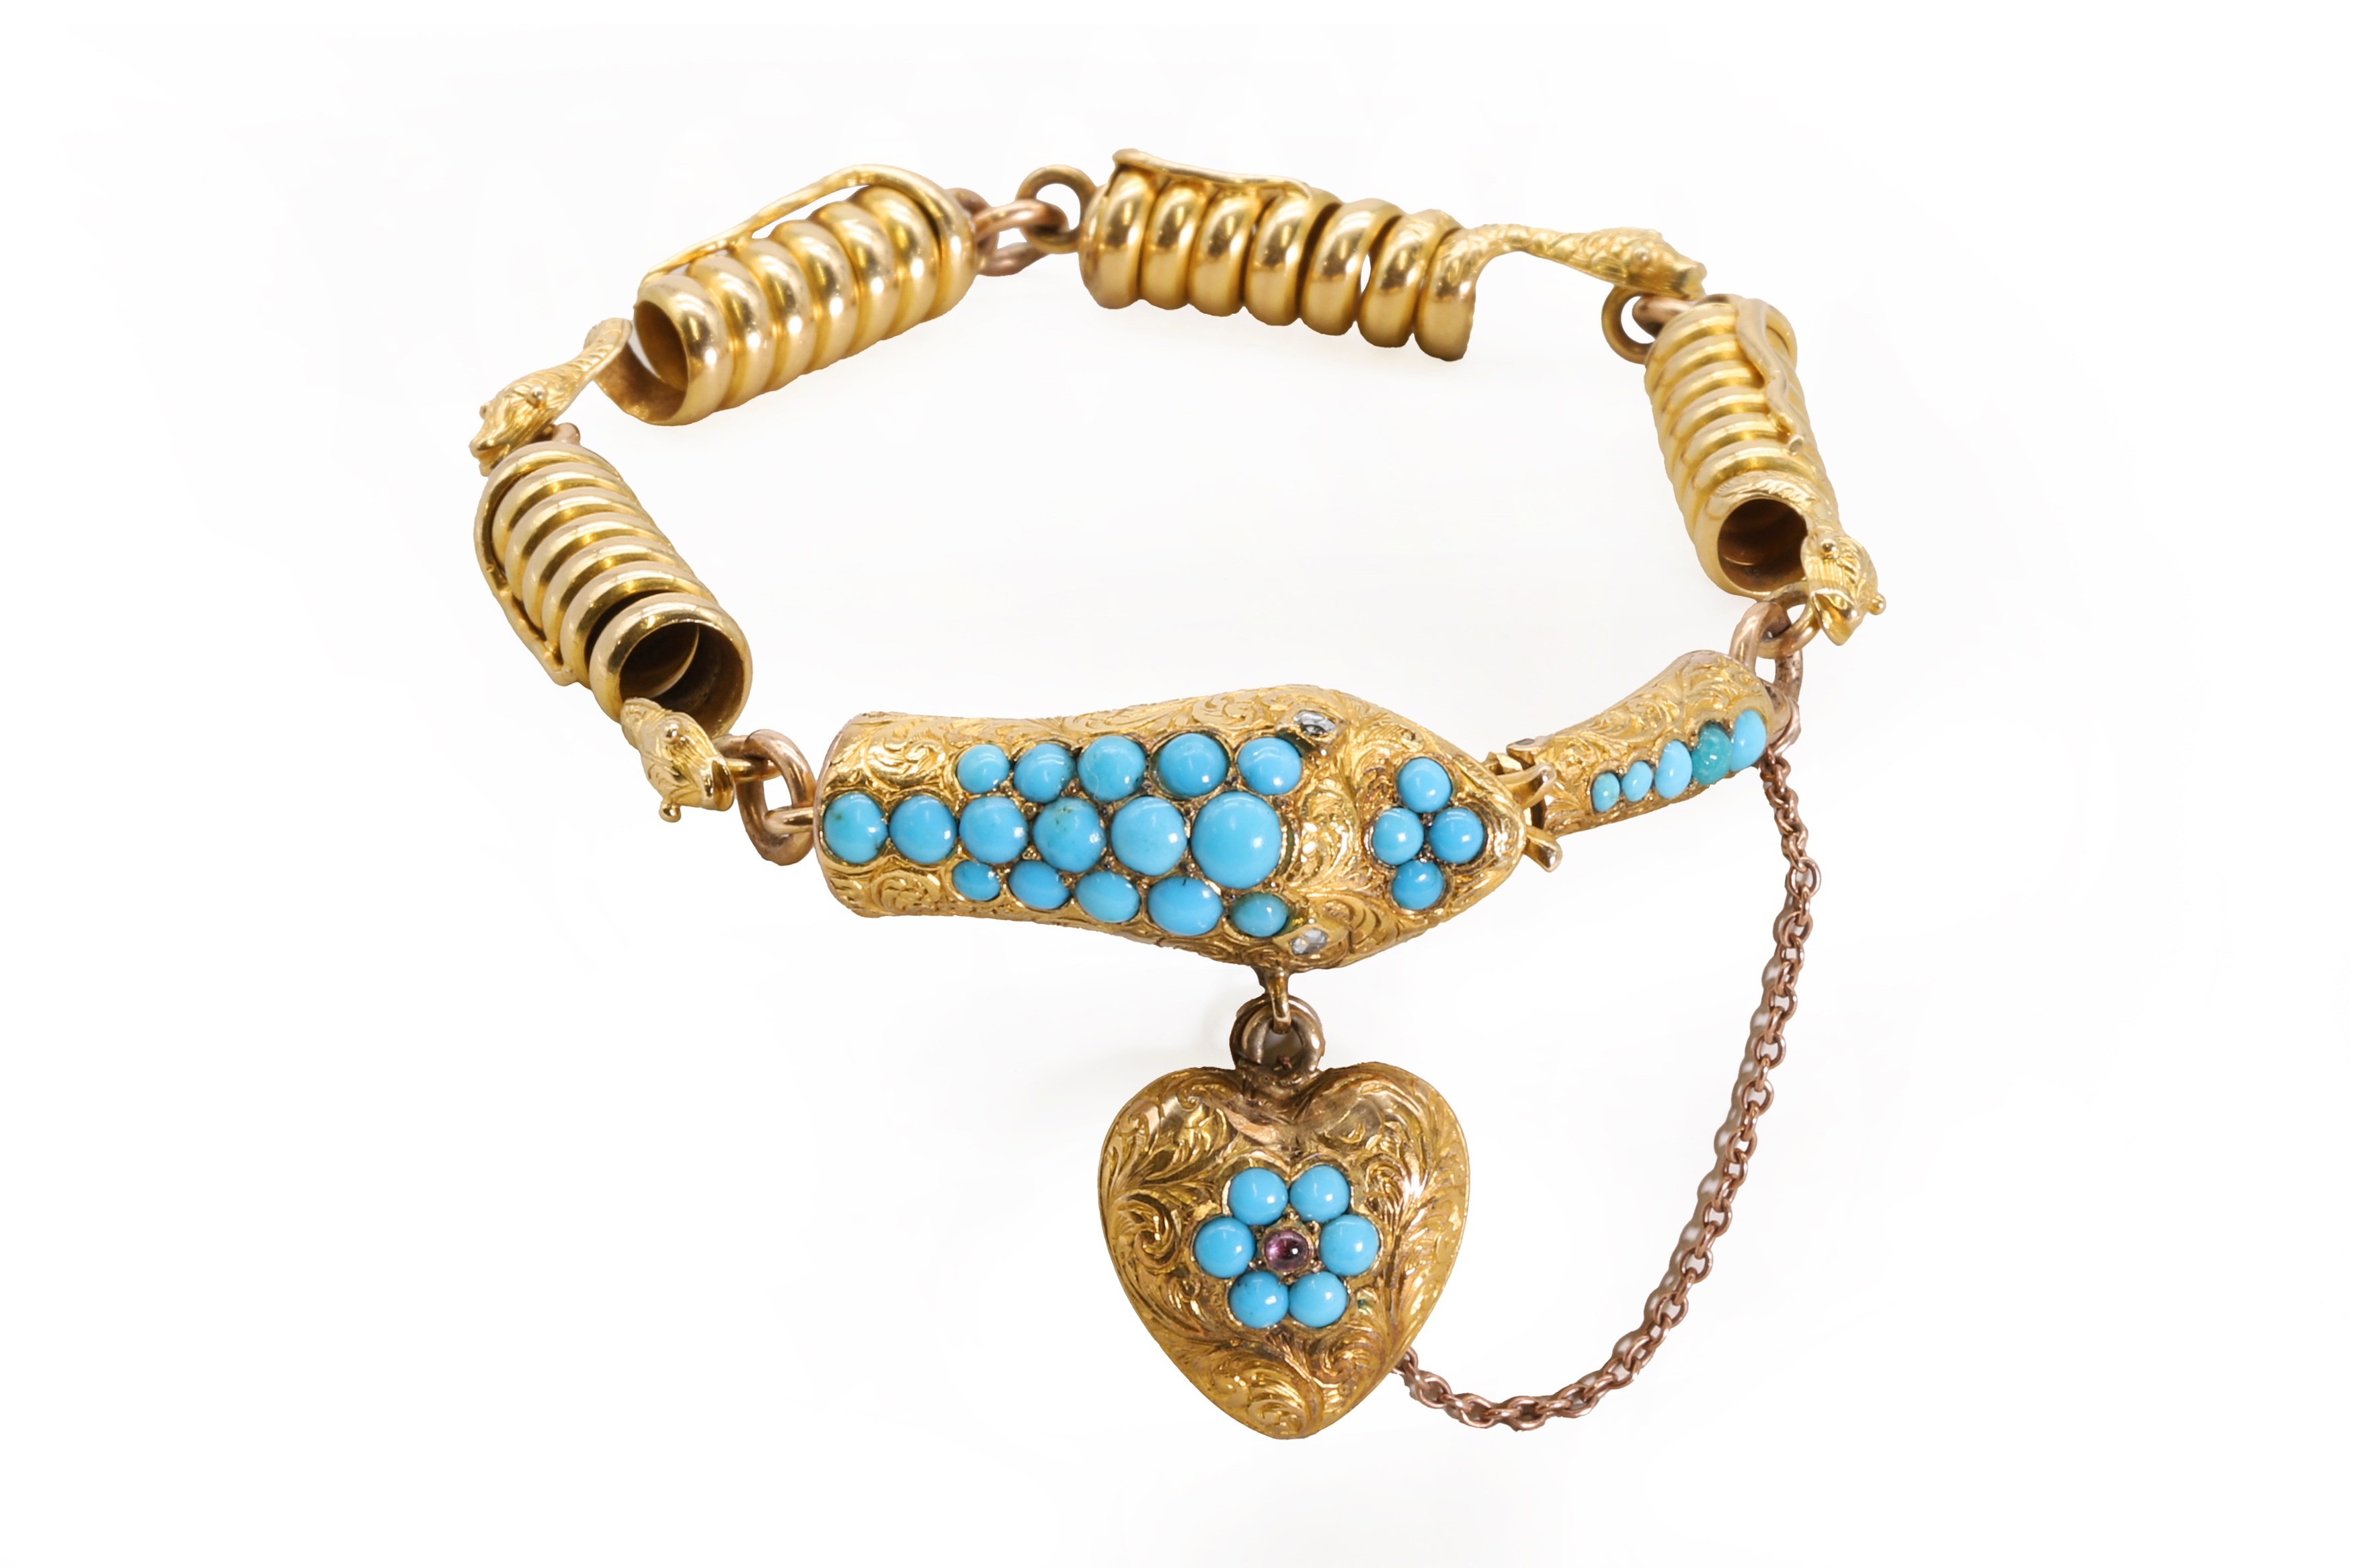 A Victorian gold and turquoise snake bracelet (£1,000-1,500)